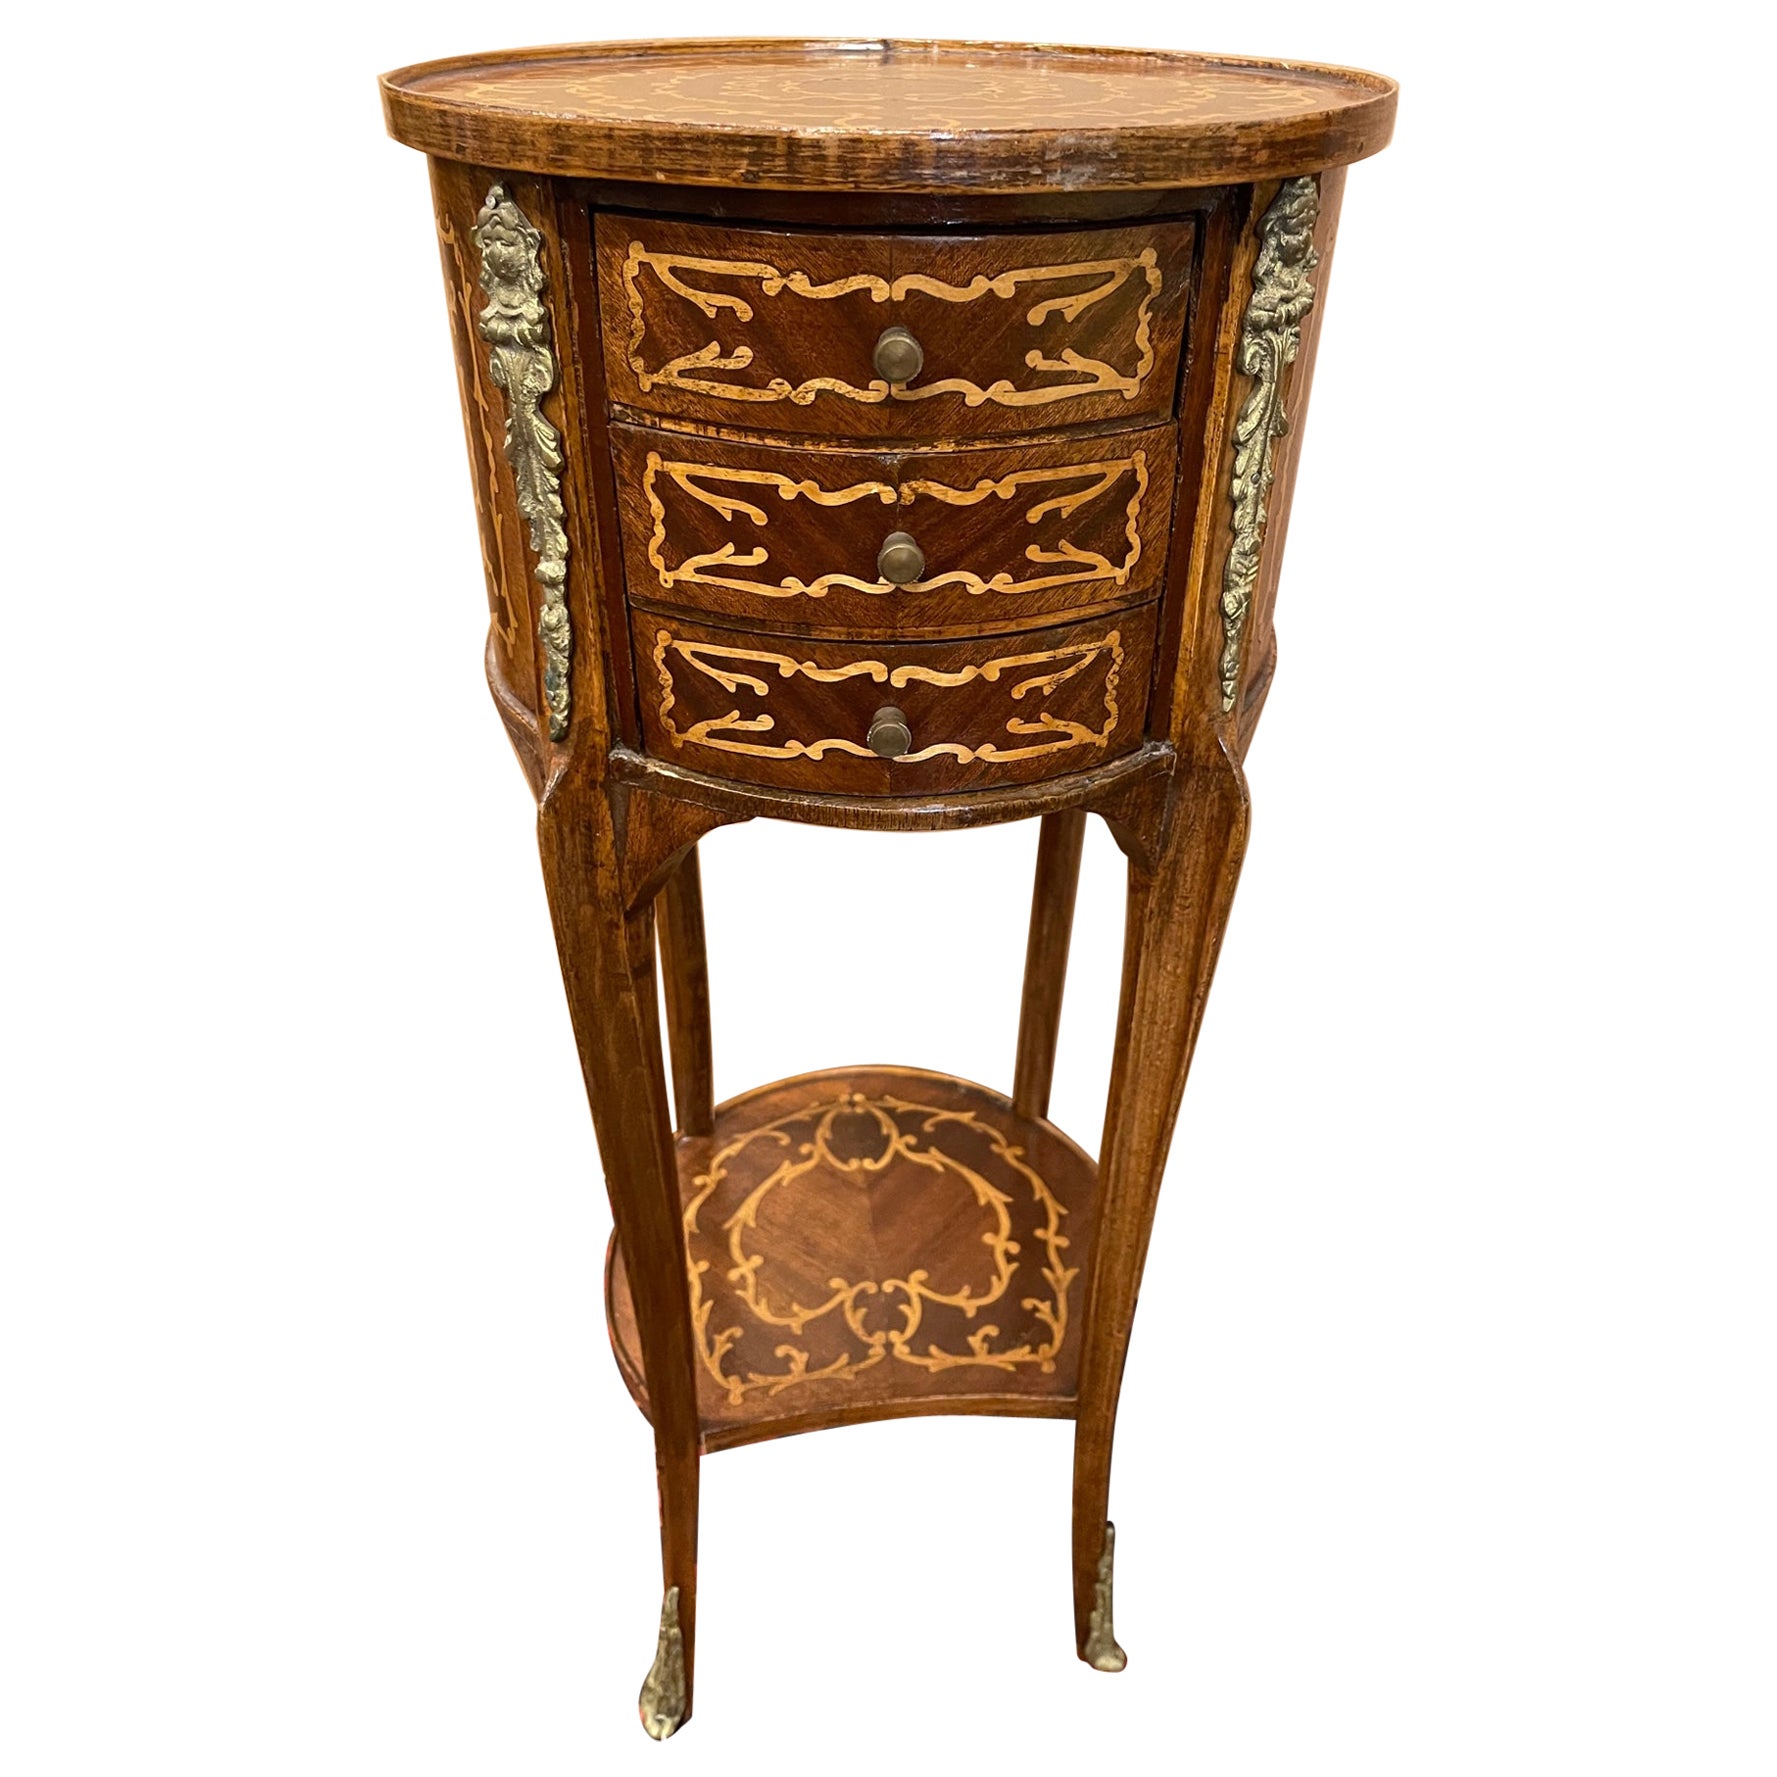 French Marquetry Side Table with Drawers and Brass Escutcheons, 20th Century